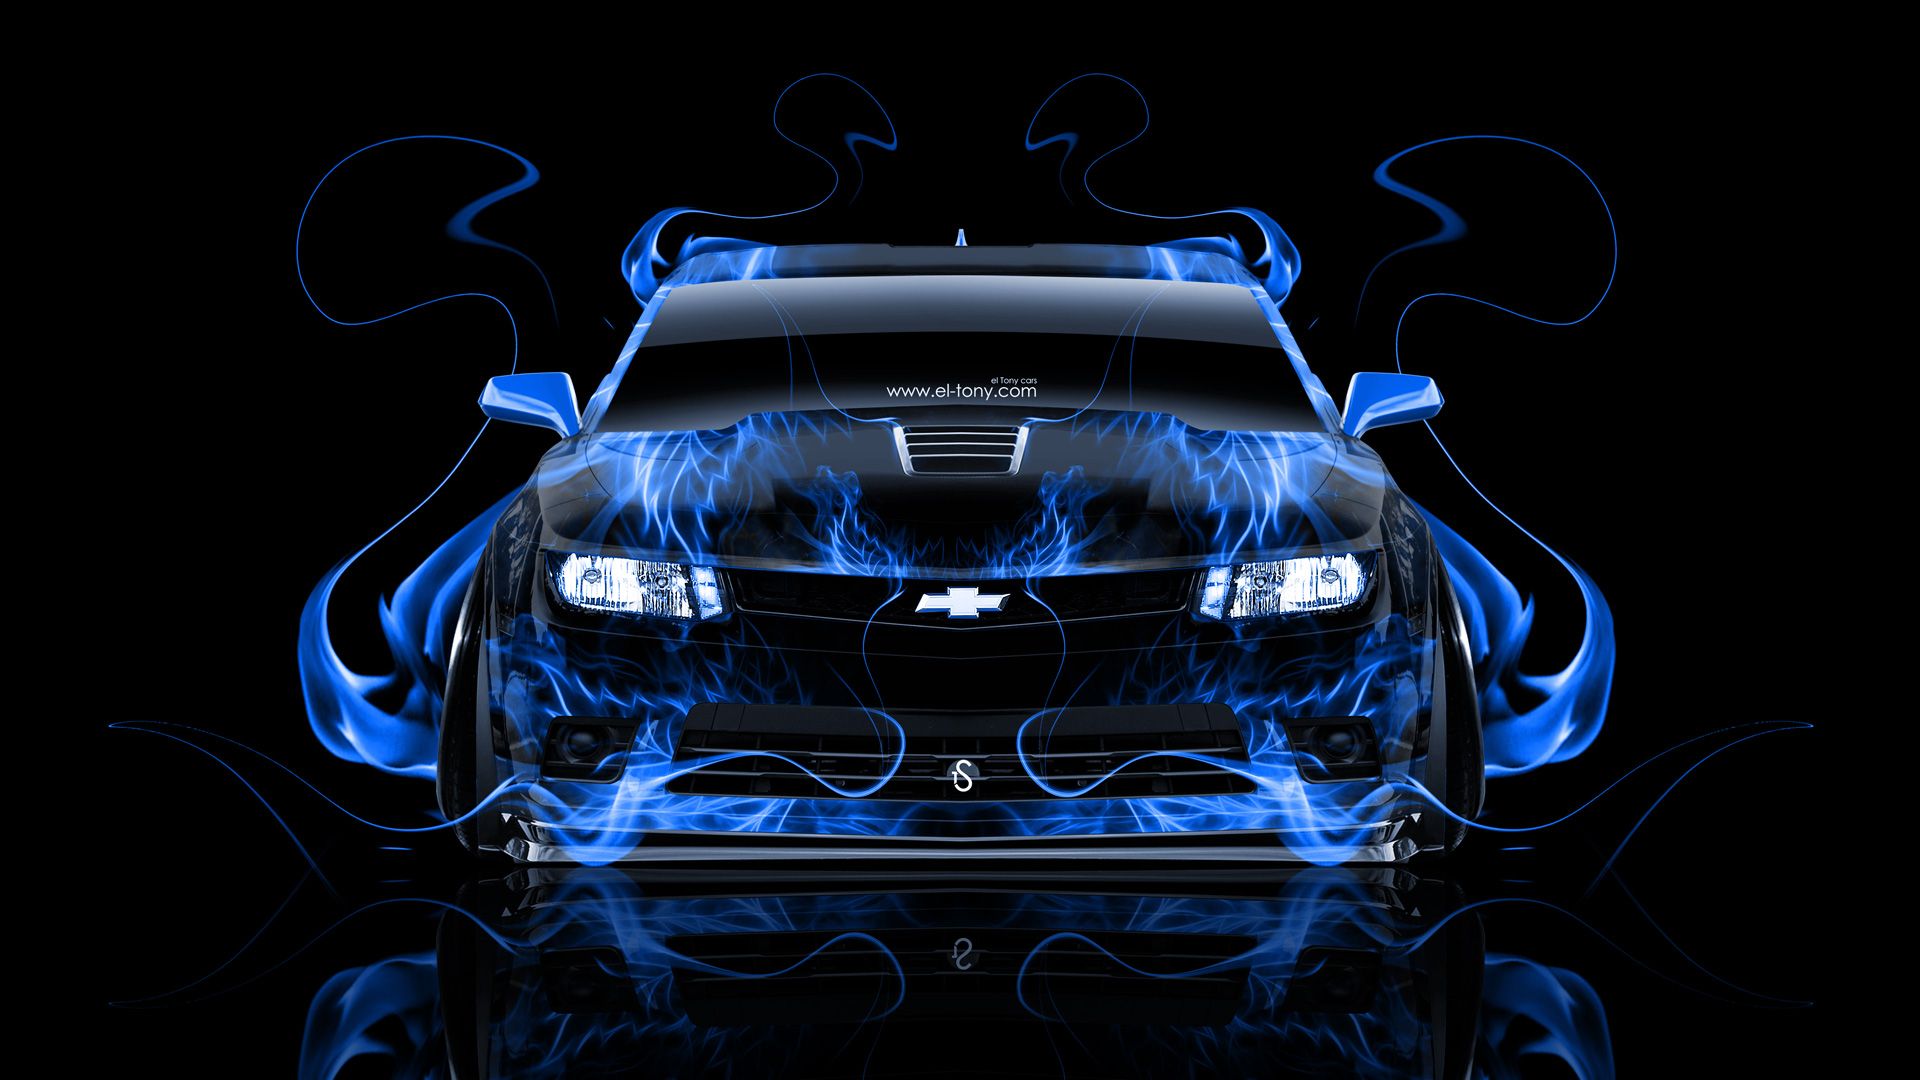 Chevy Wallpapers